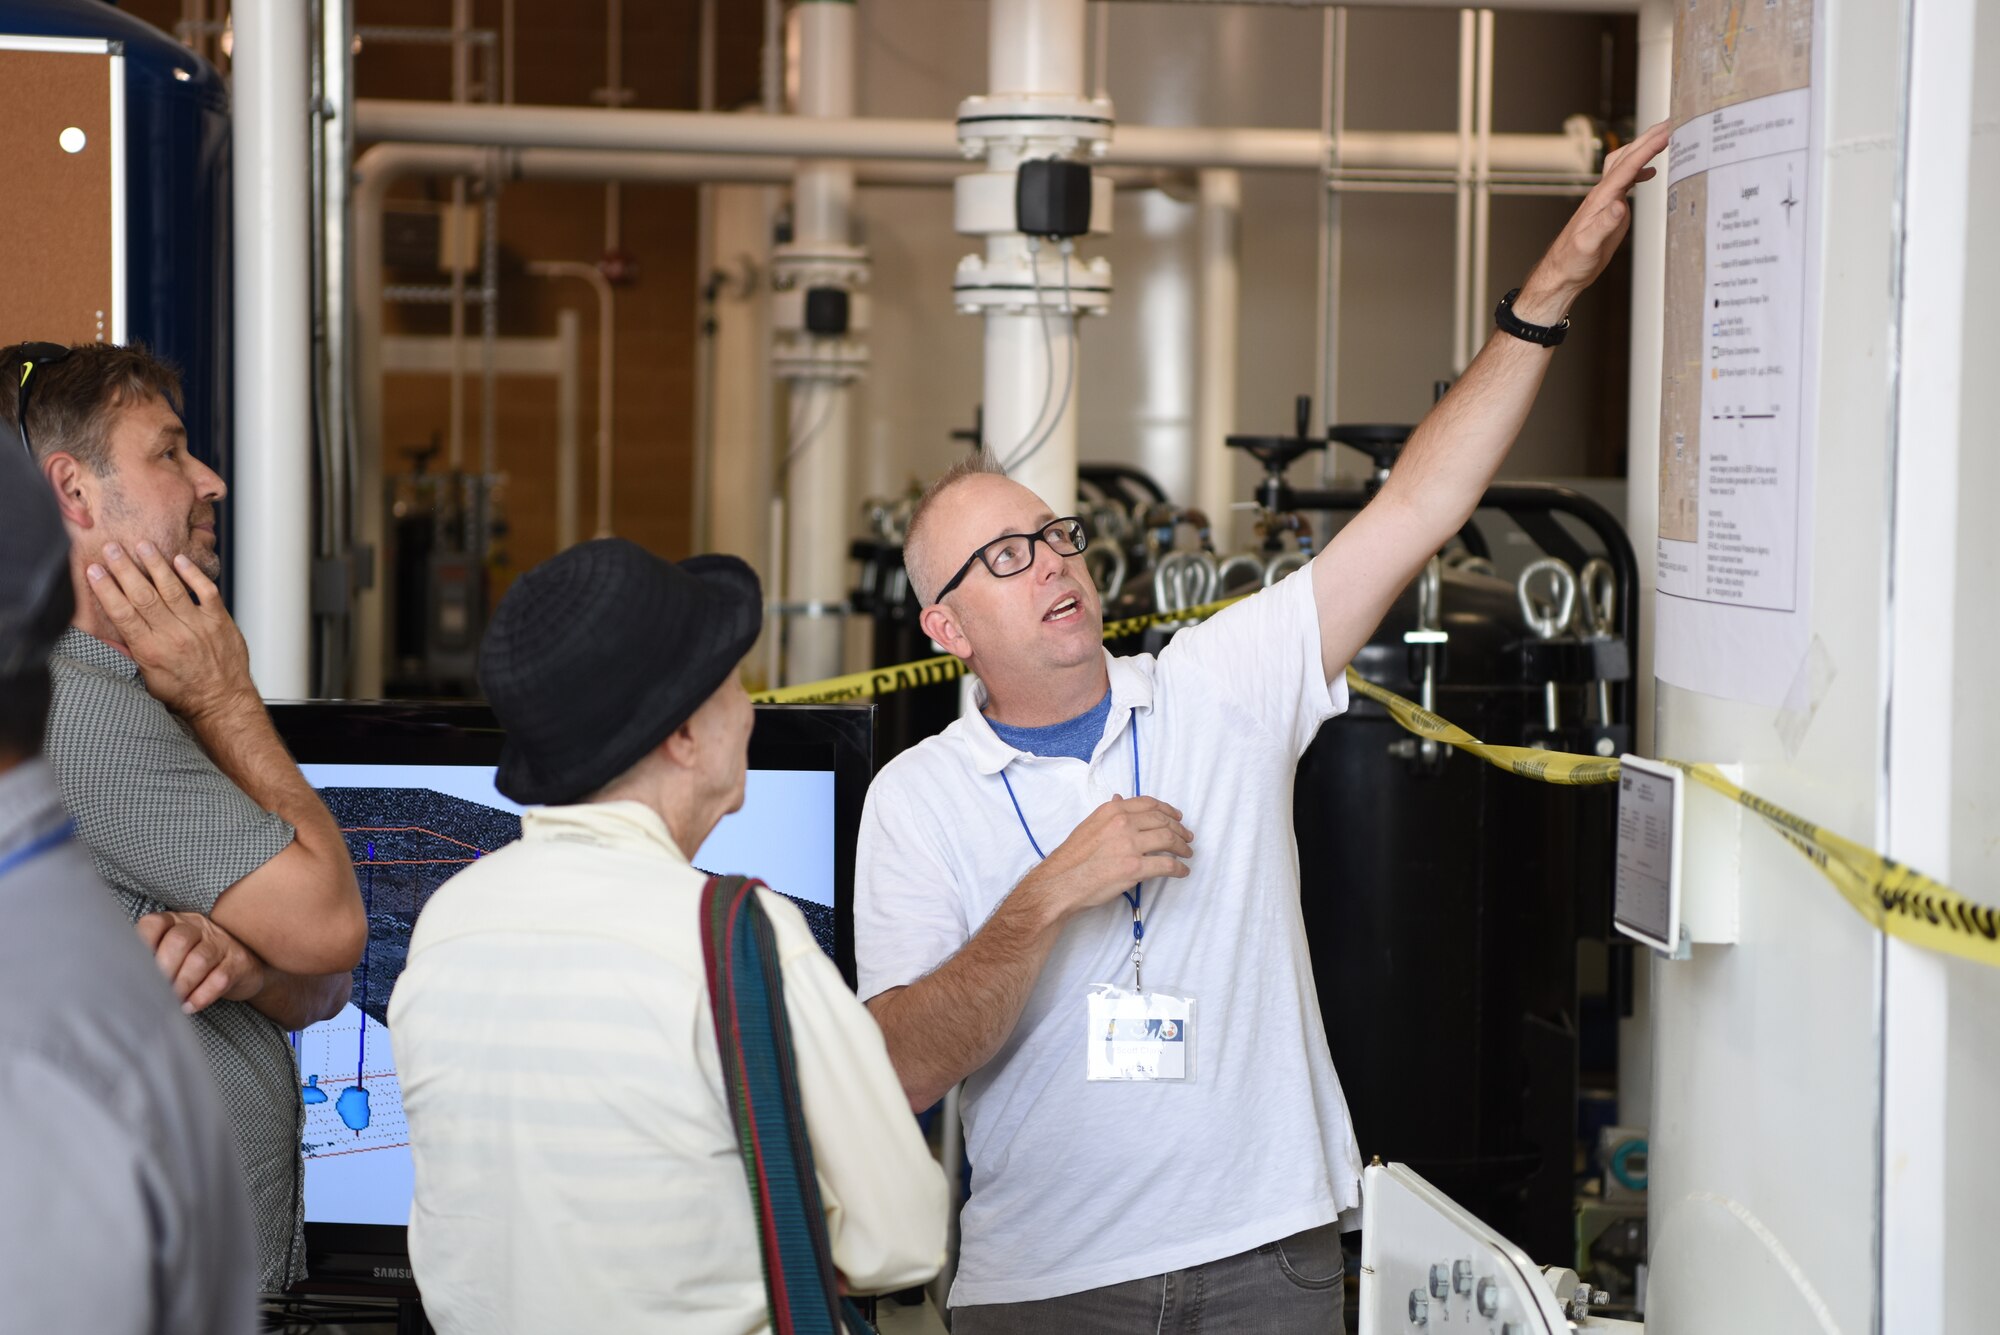 Scott Clark, U.S. Air Force Civil Engineer Center, explains how water is cleaned at the groundwater treatment system facility at Kirtland Air Force Base, N.M., July 25, 2019. Kirtland AFB hosted an open house to give the public the opportunity to learn and ask questions about the work being done to remove groundwater contamination. (U.S. Air Force photo by Senior Airman Eli Chevalier)